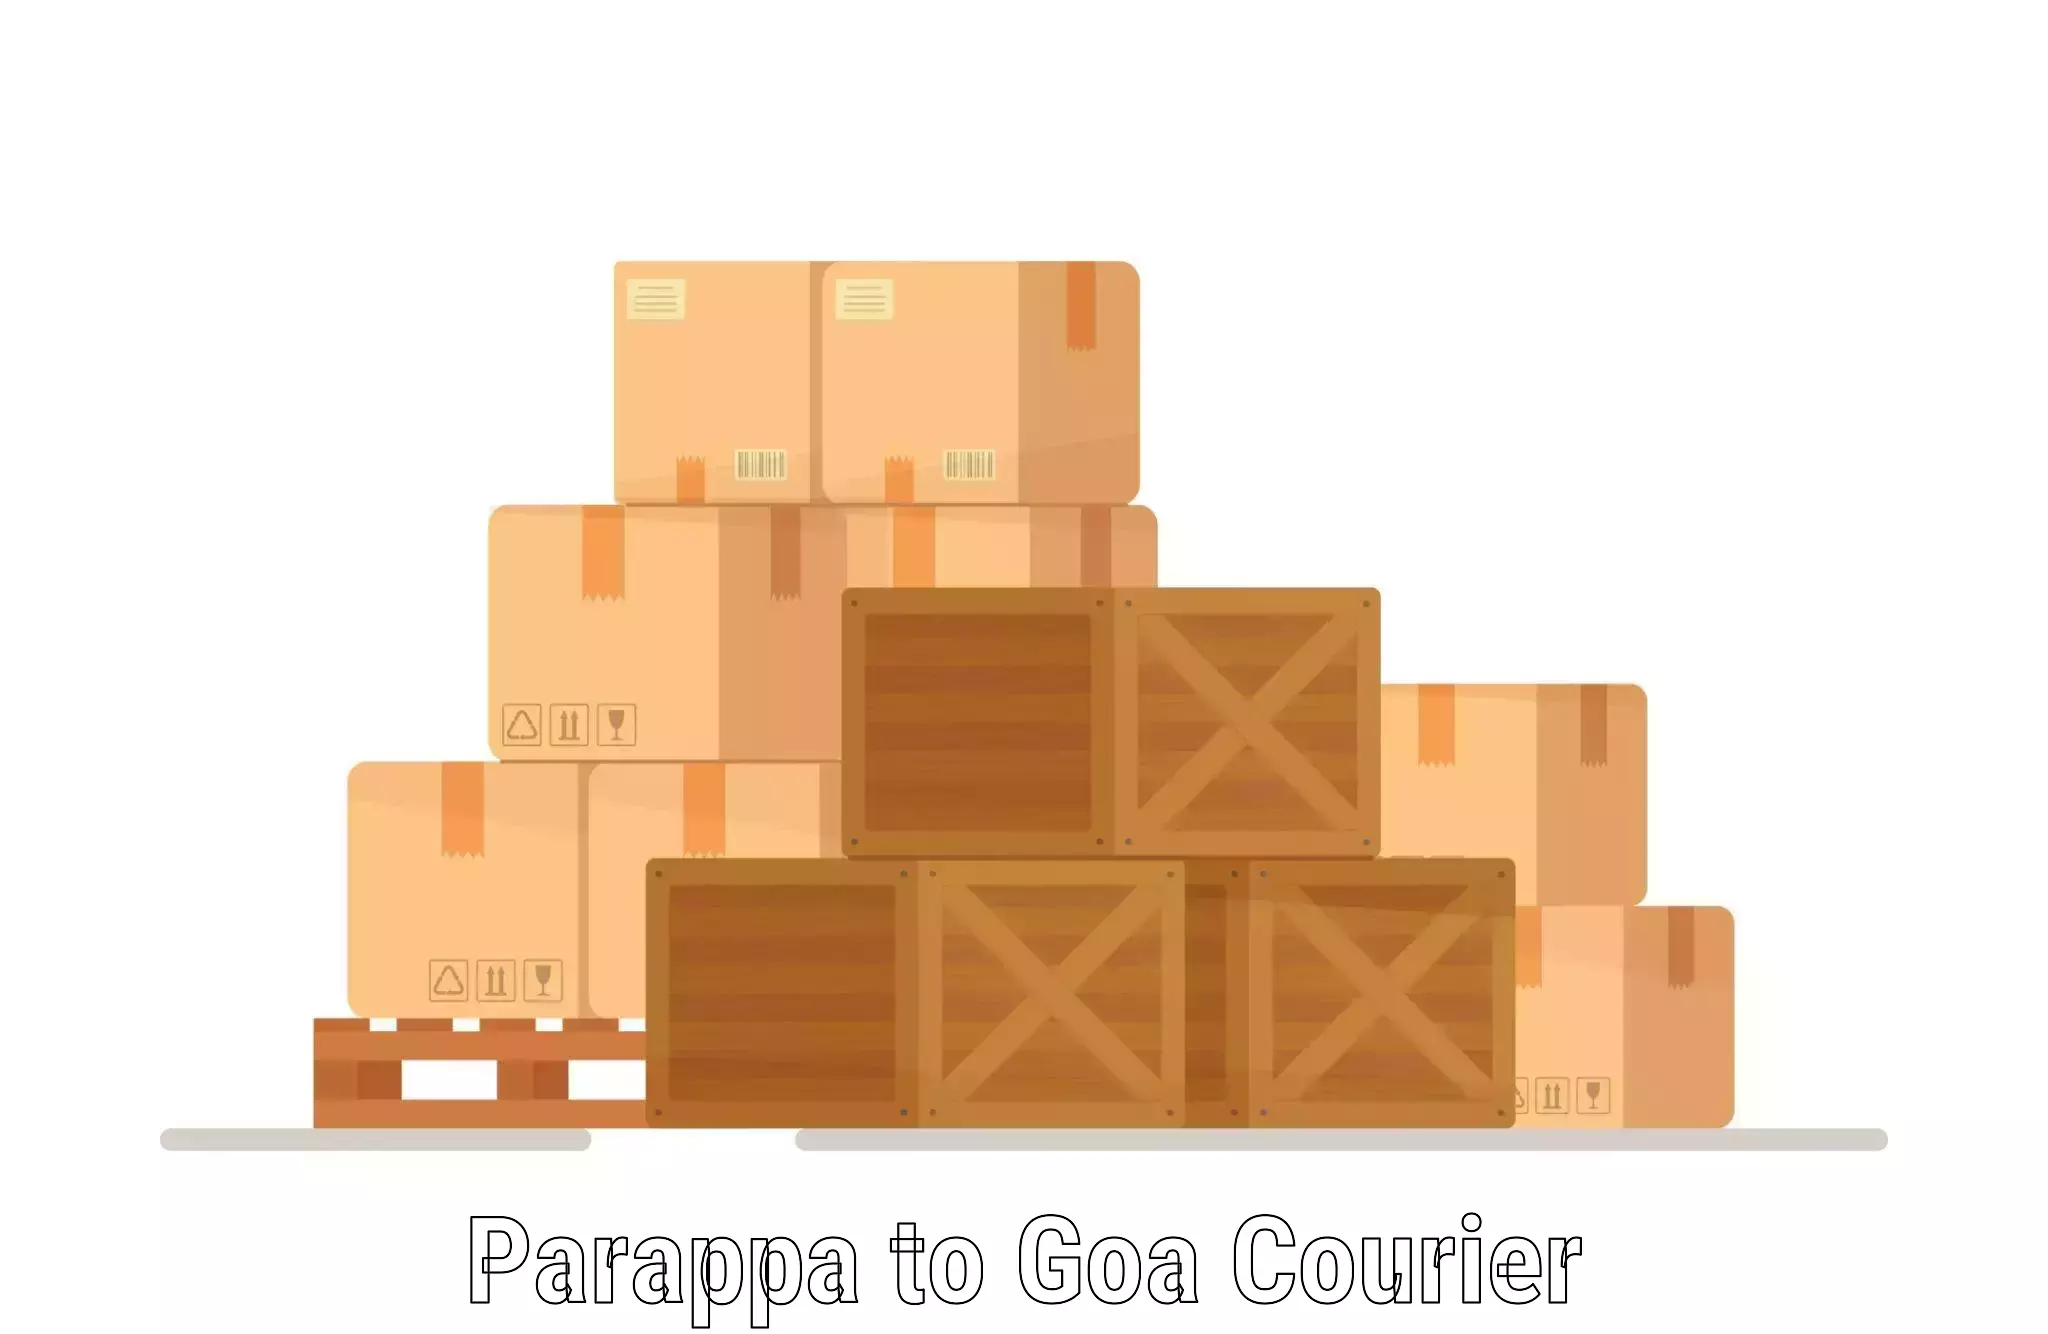 Next-day freight services Parappa to Panaji